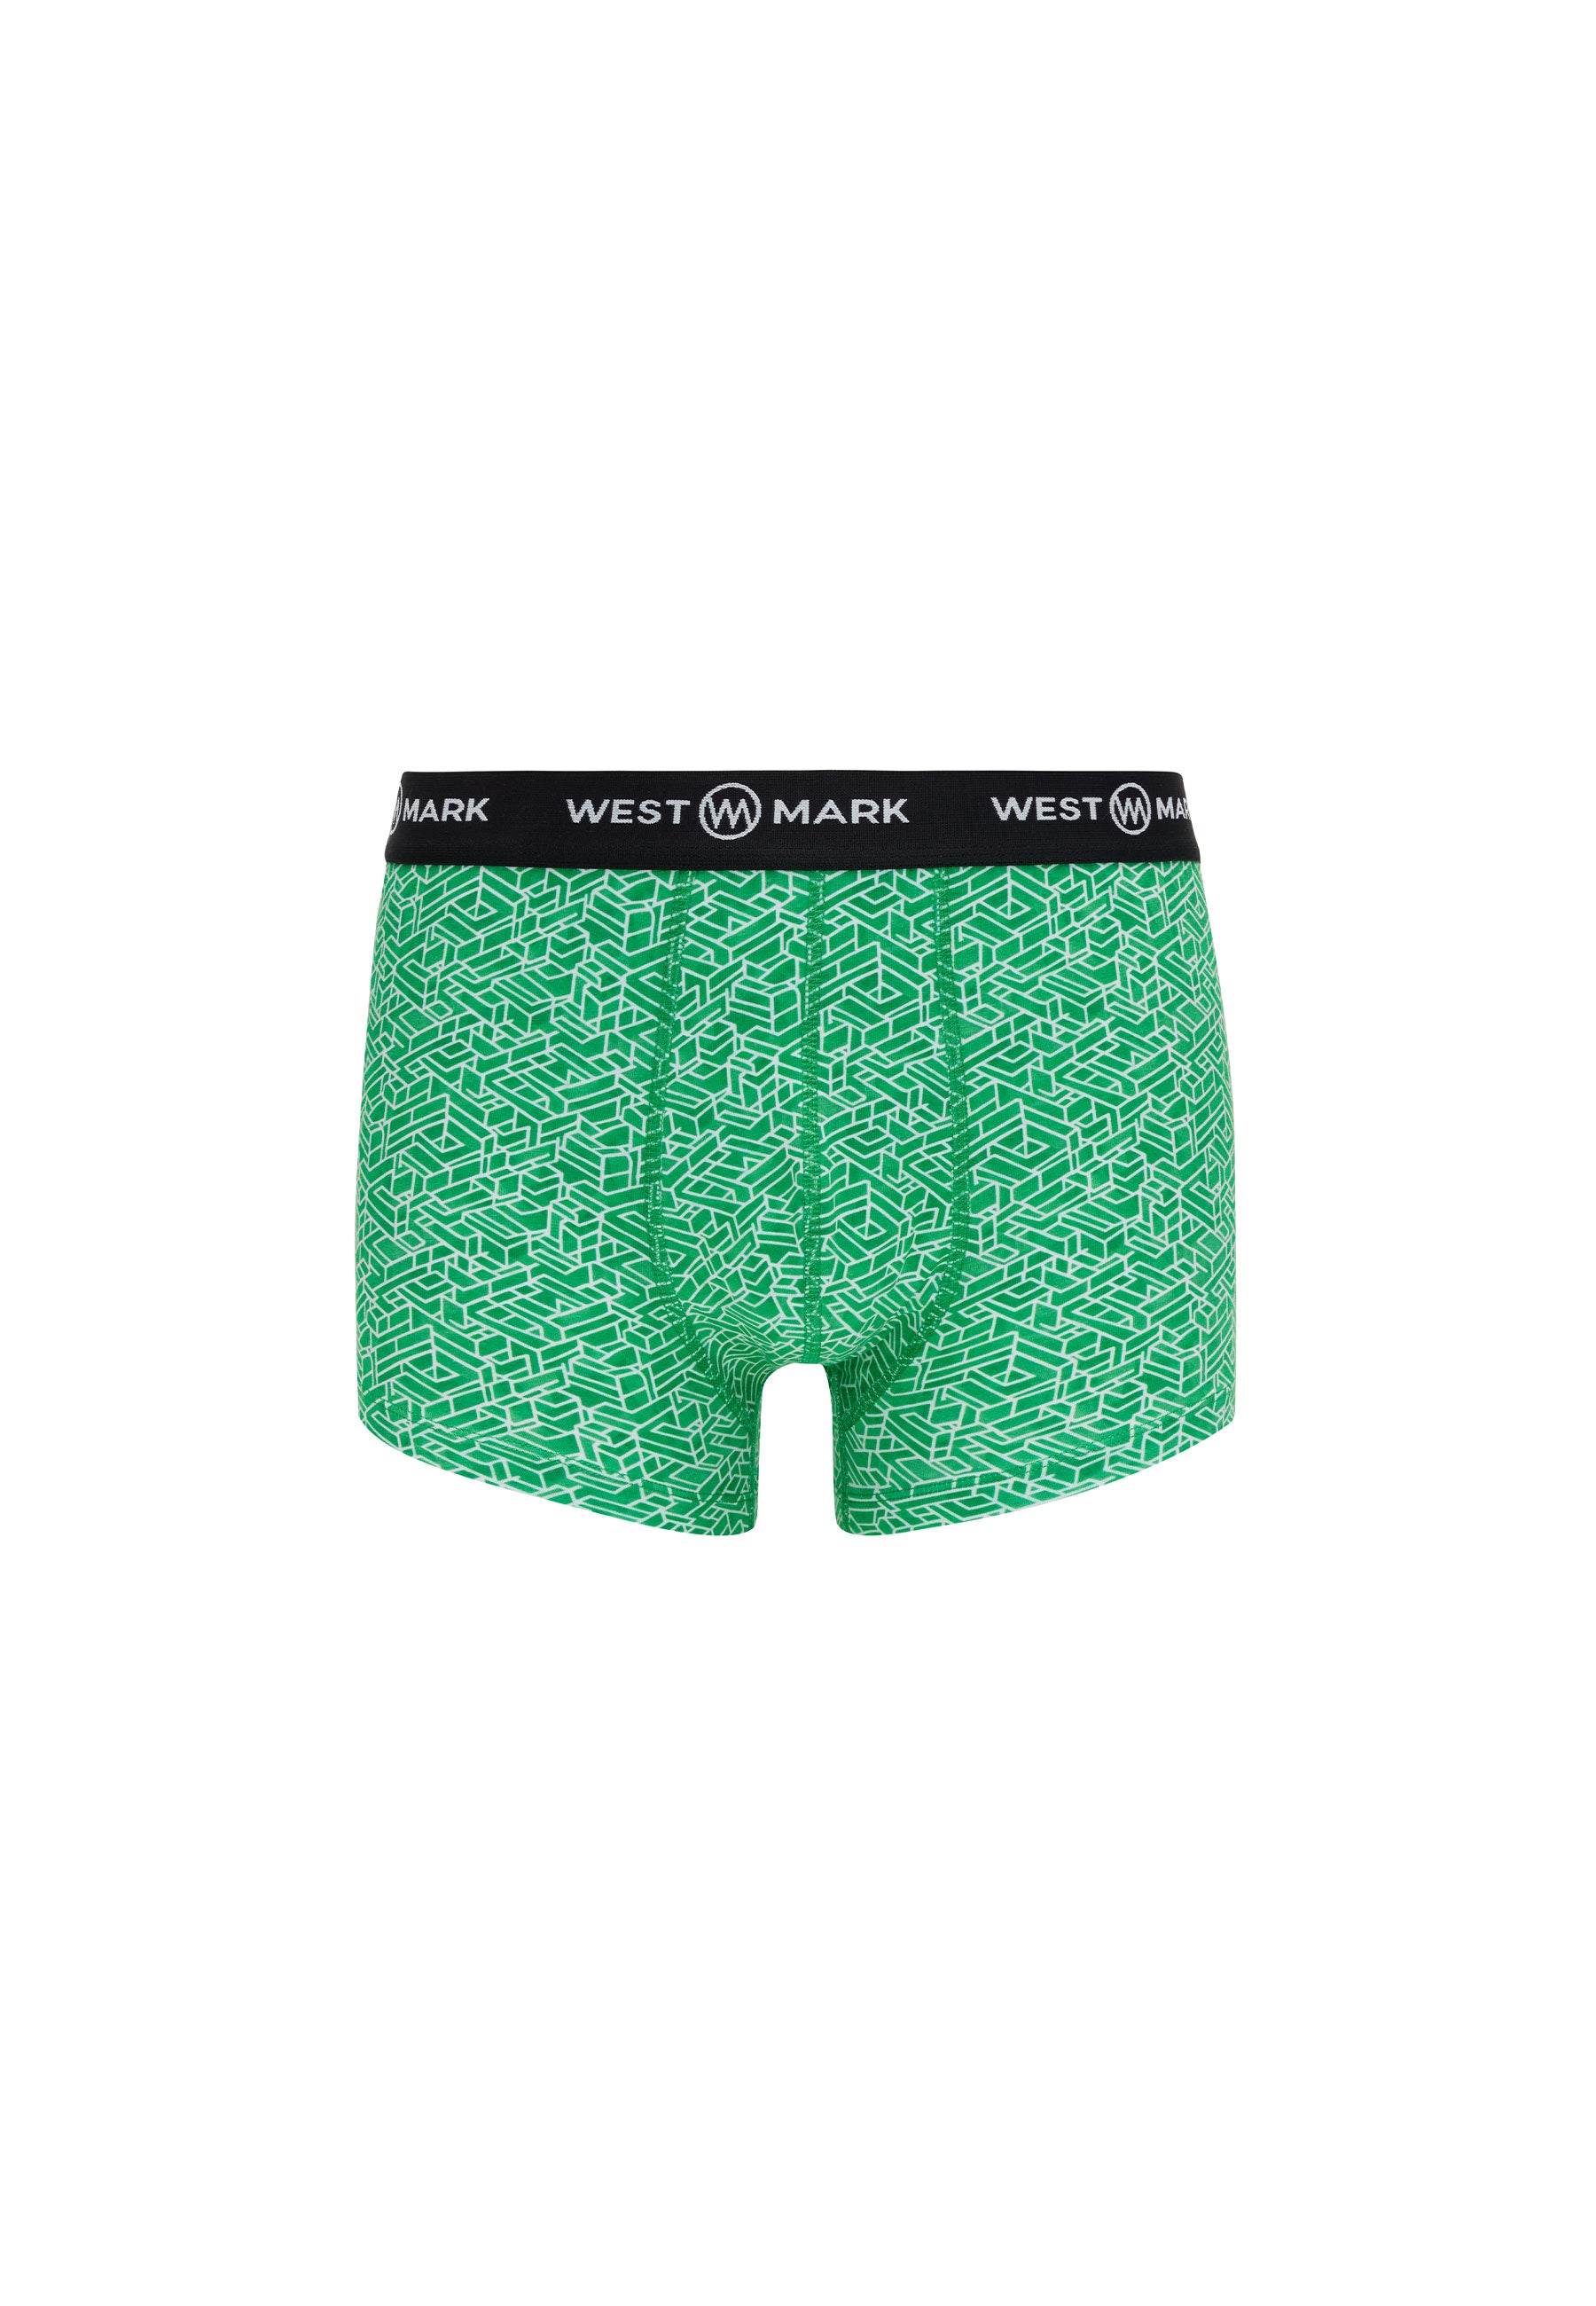 OSCAR 3-PACK WMABSTRACT in Green, White